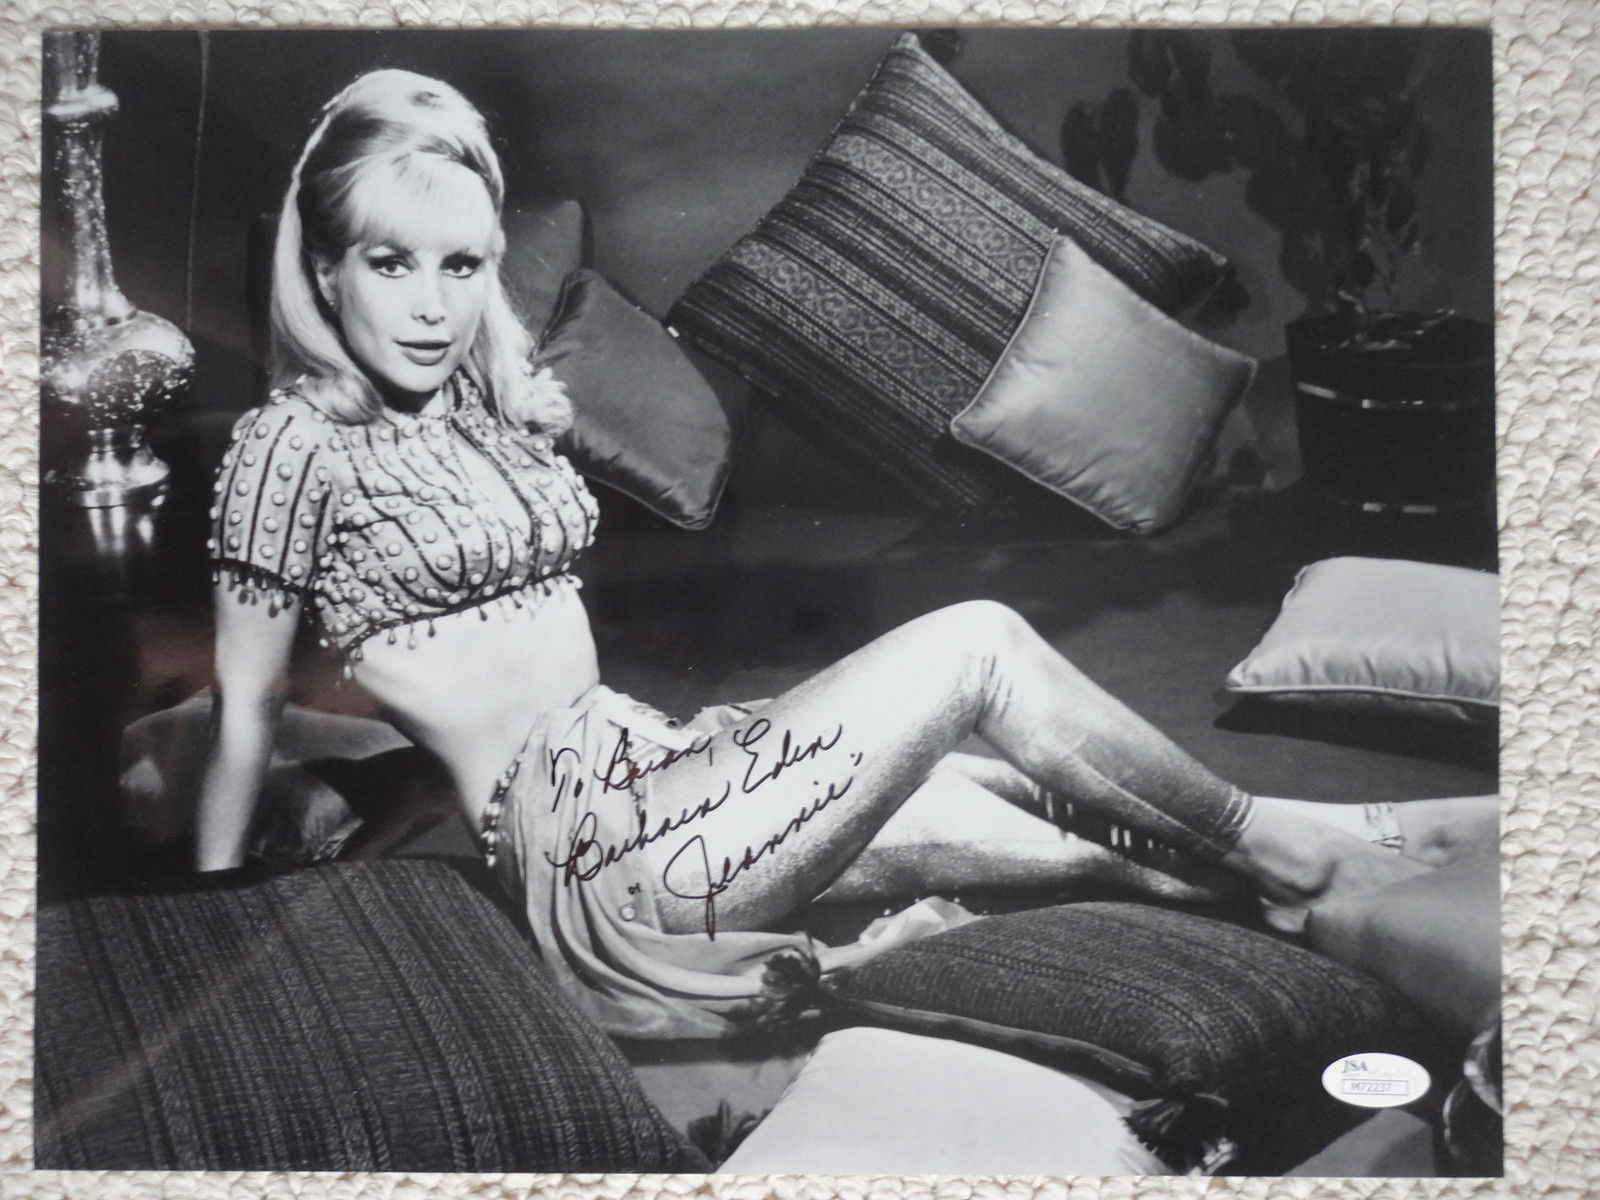 BARBARA EDEN HAND SIGNED 11x14 OVERSIZED PHOTO DREAM OF JEANNIE TO STEVE JS...